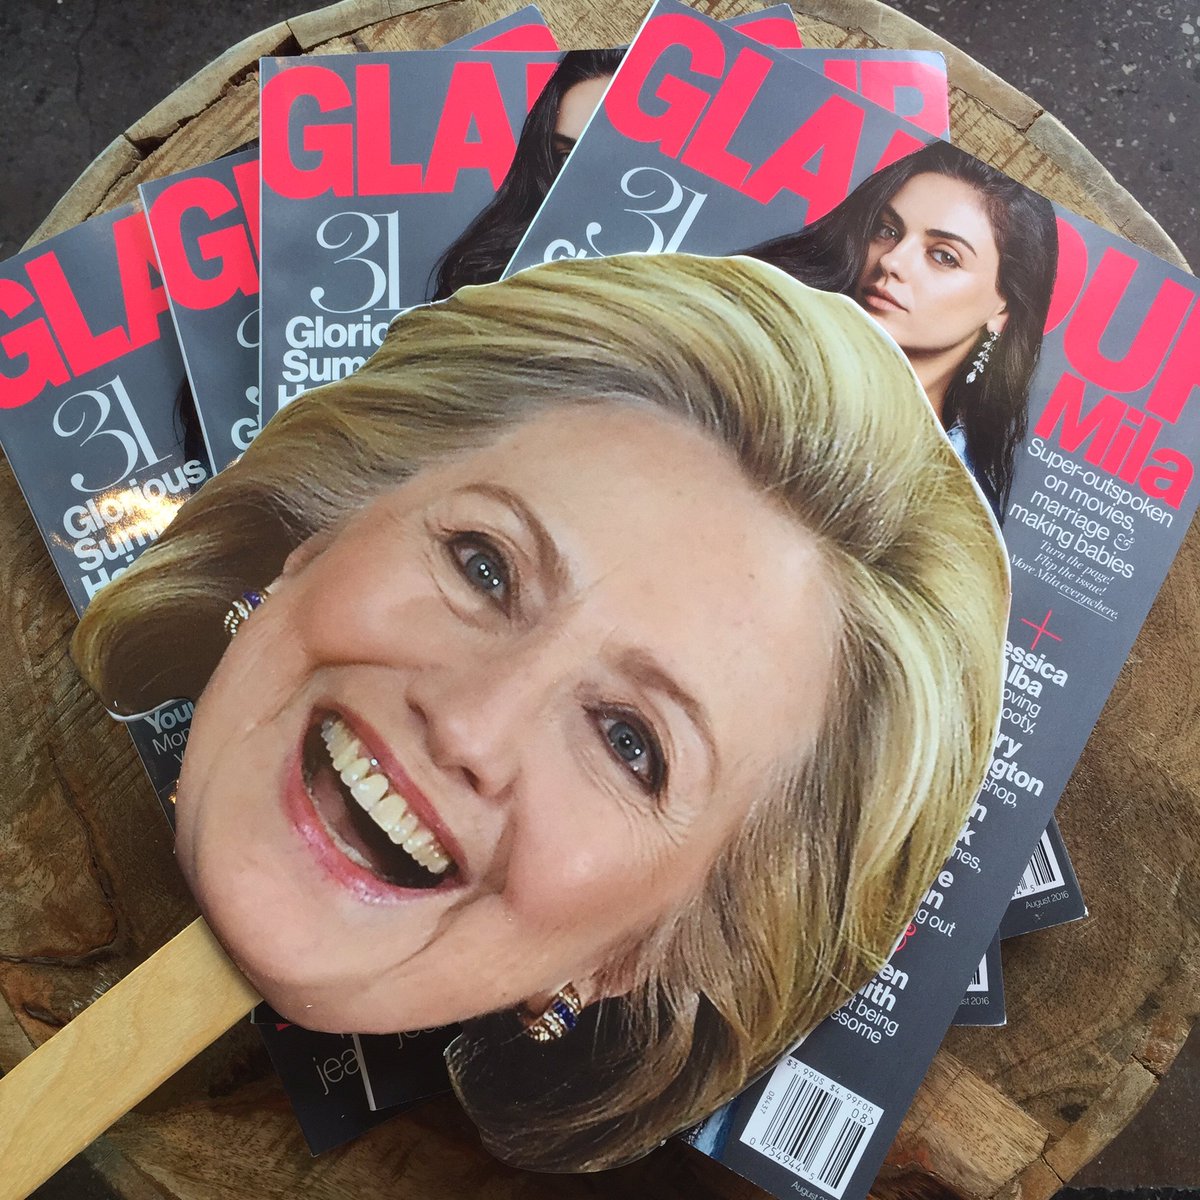 Almost time for @glamourmag x @facebook at #DemsInPhilly at 5PM EST! Watch at https://t.co/NCysFw2zBH https://t.co/lDPkRxMx2u